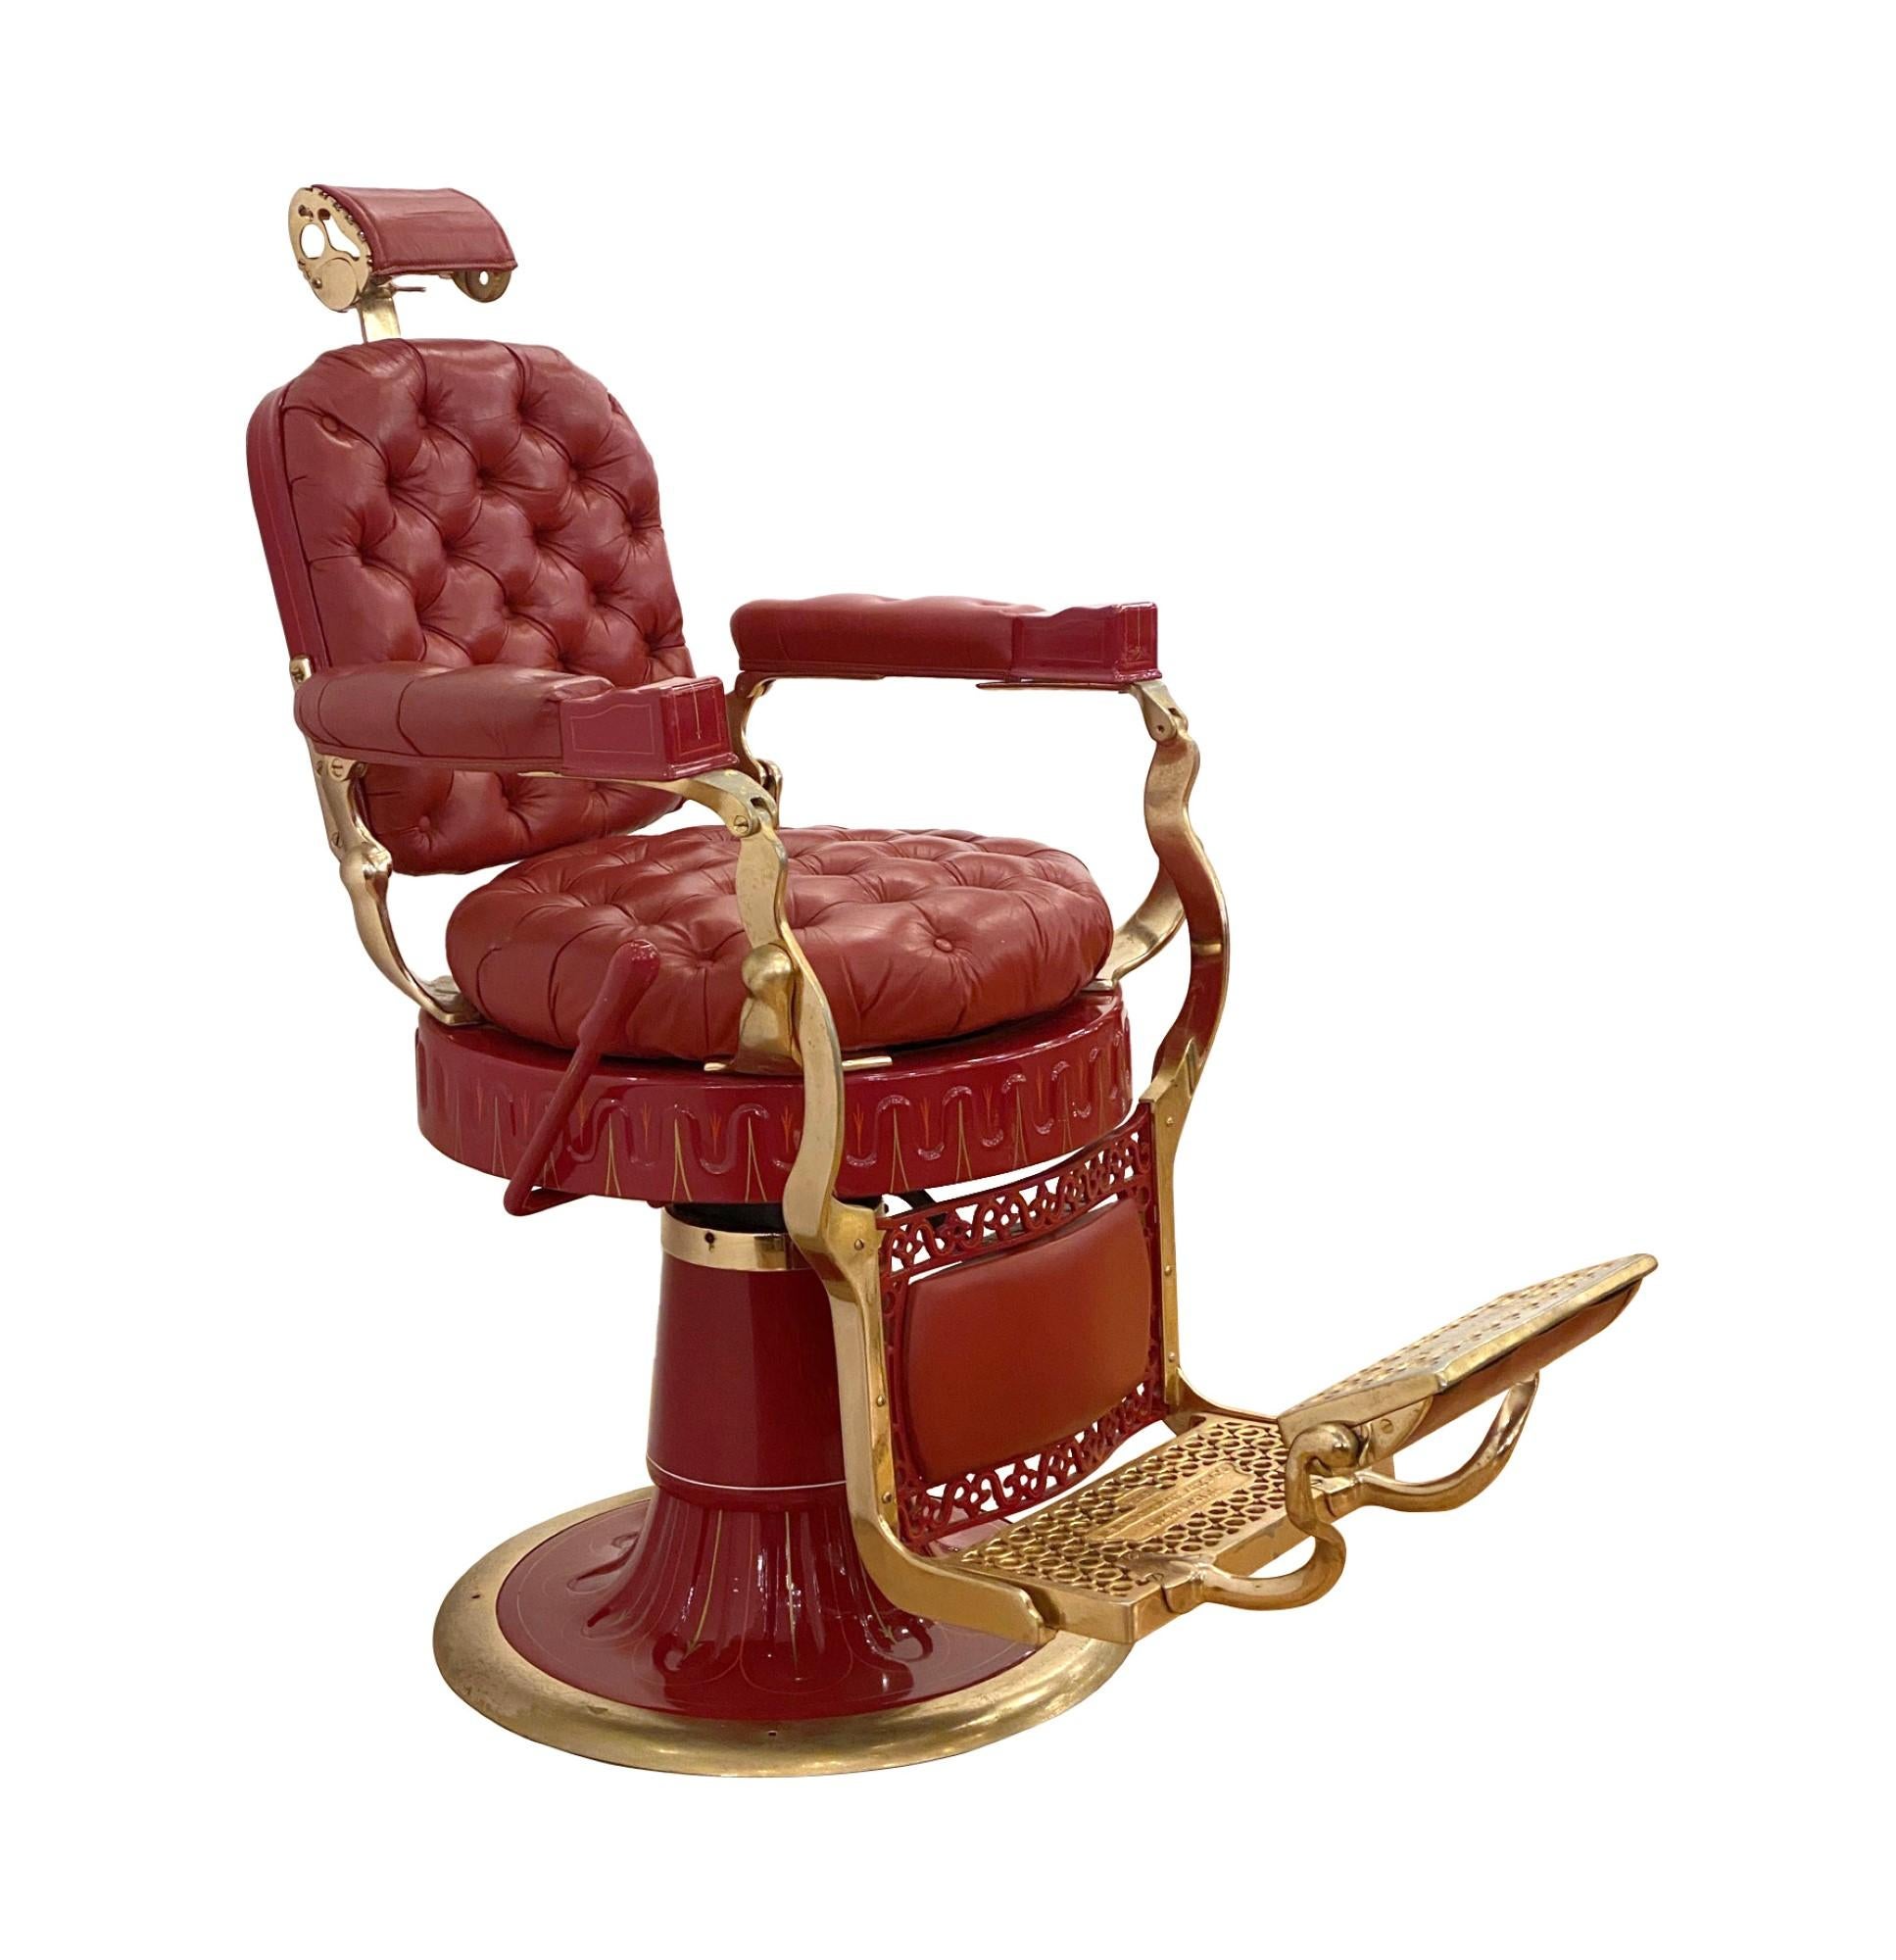 This top of the line antique Berninghaus Hercules barber chair has been restored. The chair has red tufted leather and a polished brass ornate frame. The Fine hand painted details along the base and seat complete its uniqueness. The hand crank works